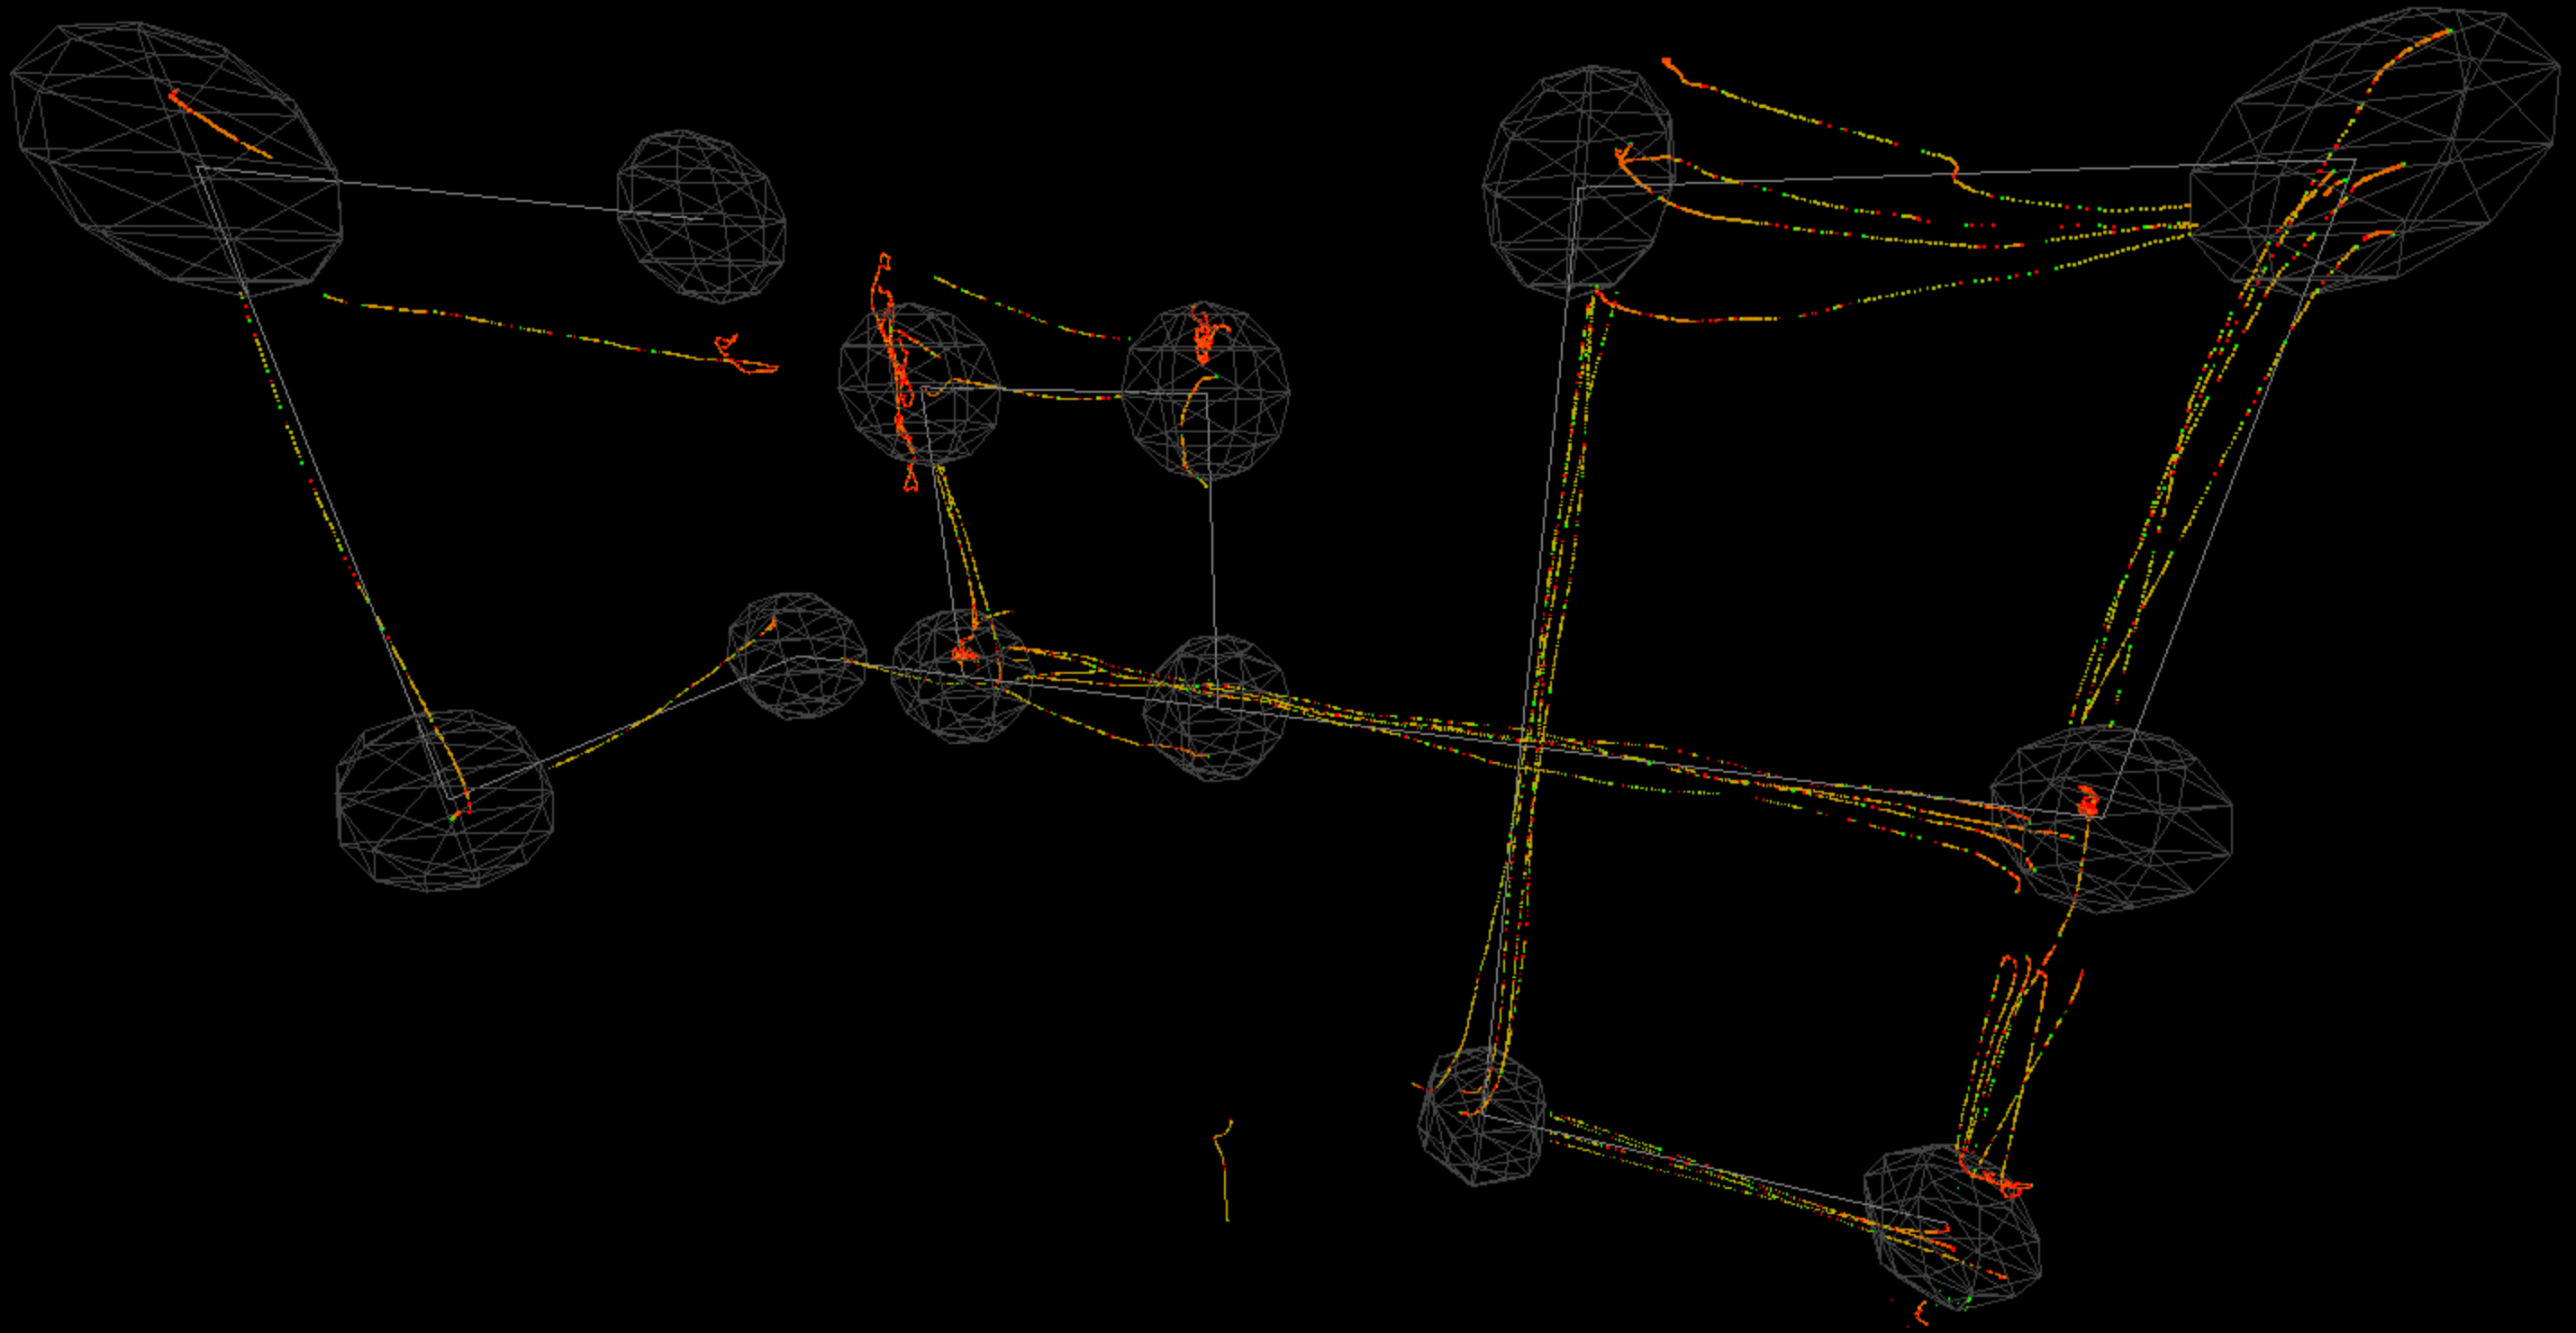 Plotted out flight paths from a drone used in a drone competition